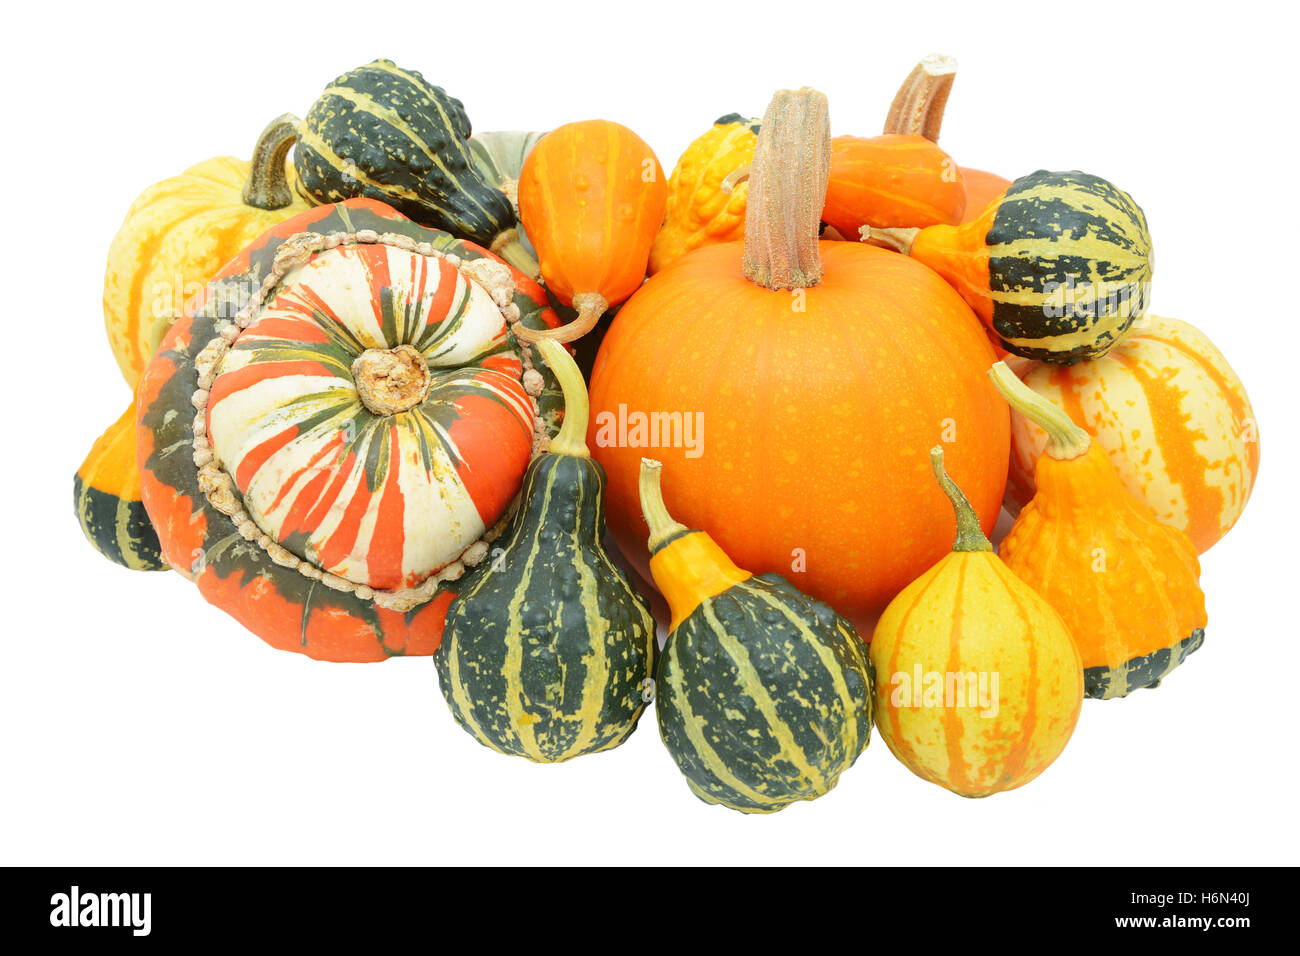 Group of autumnal gourds - pumpkins, Turks turban squash and mixed ornamental gourds - isolated on a white background Stock Photo